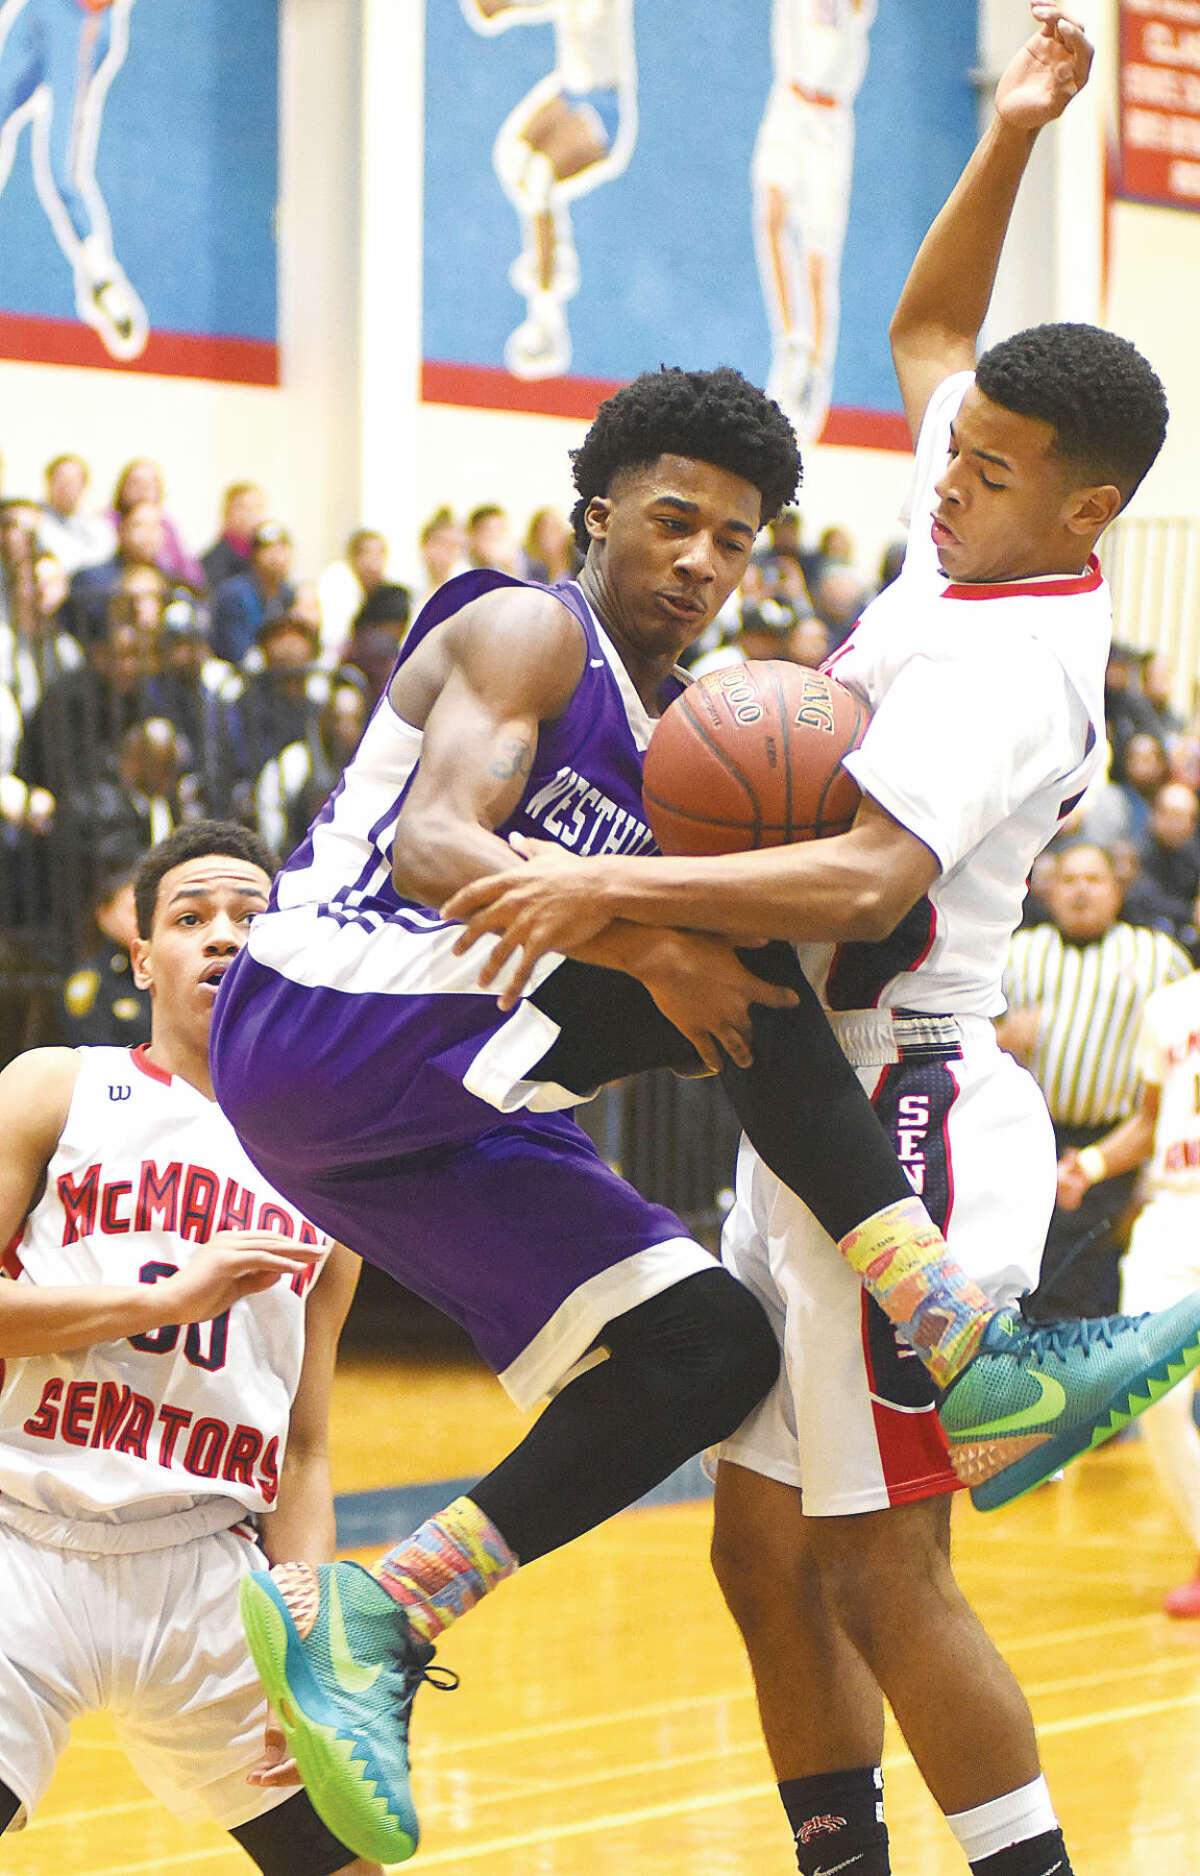 Hour photo/John Nash - Brien McMahon's Marvin Best, right, disrupts the offensive drive of Westhill's Parrish Powell as the Senators' Joe Cantey Jr. looks on during Tuesday's game at Kehoe-King Gym in Norwalk. McMahon moved to 7-0 with a 66-51 win over the Vikings.